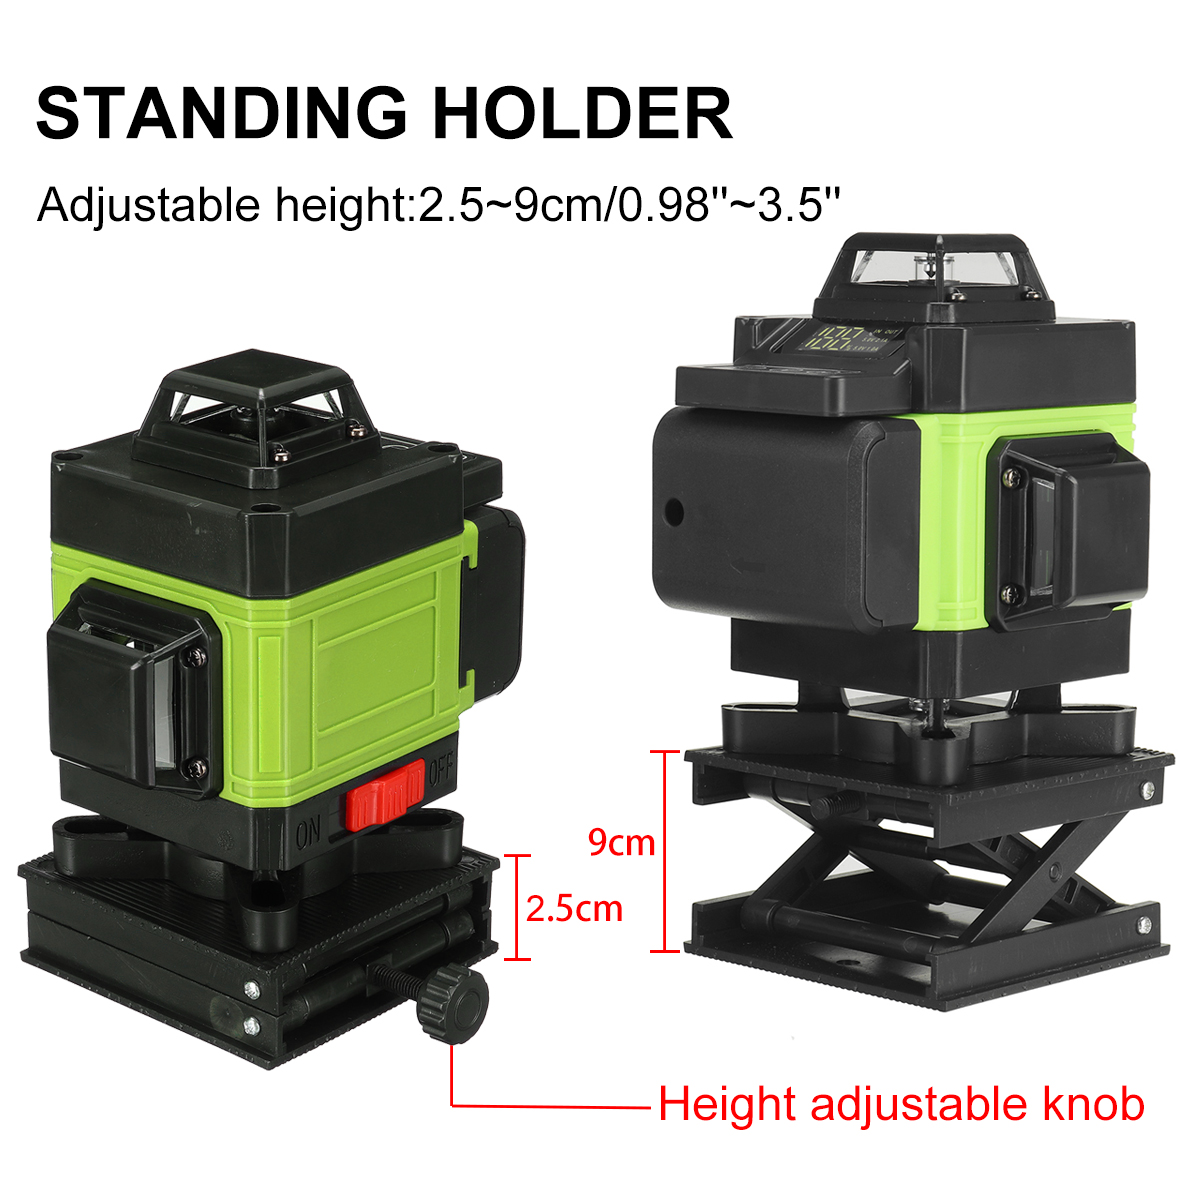 16-Lines-Laser-Level-3D-Green-Horizontal-Vertical-Line-Laser-Auto-Self-Leveling-Remote-Control-Indoo-1906144-3